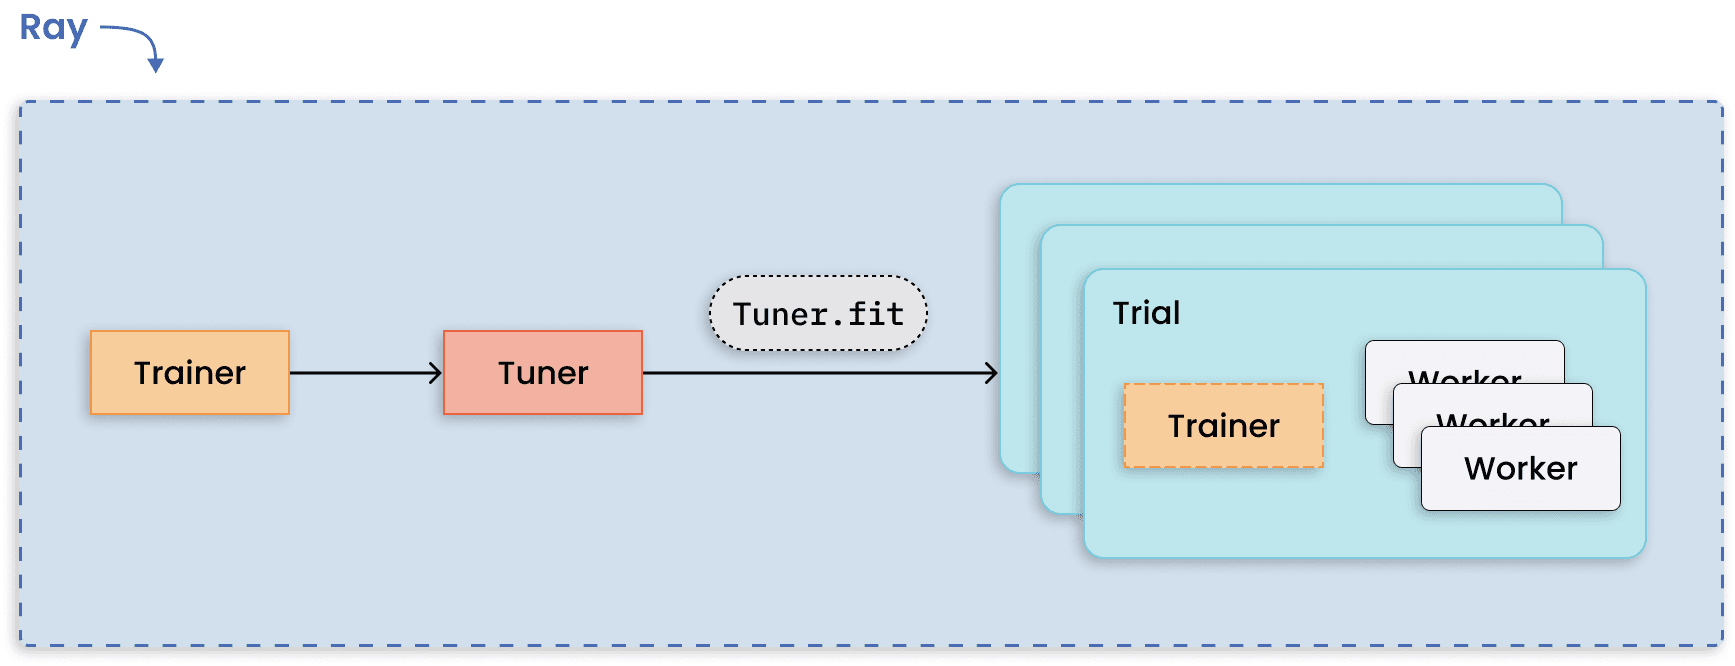 Distributed tuning with distributed training per trial